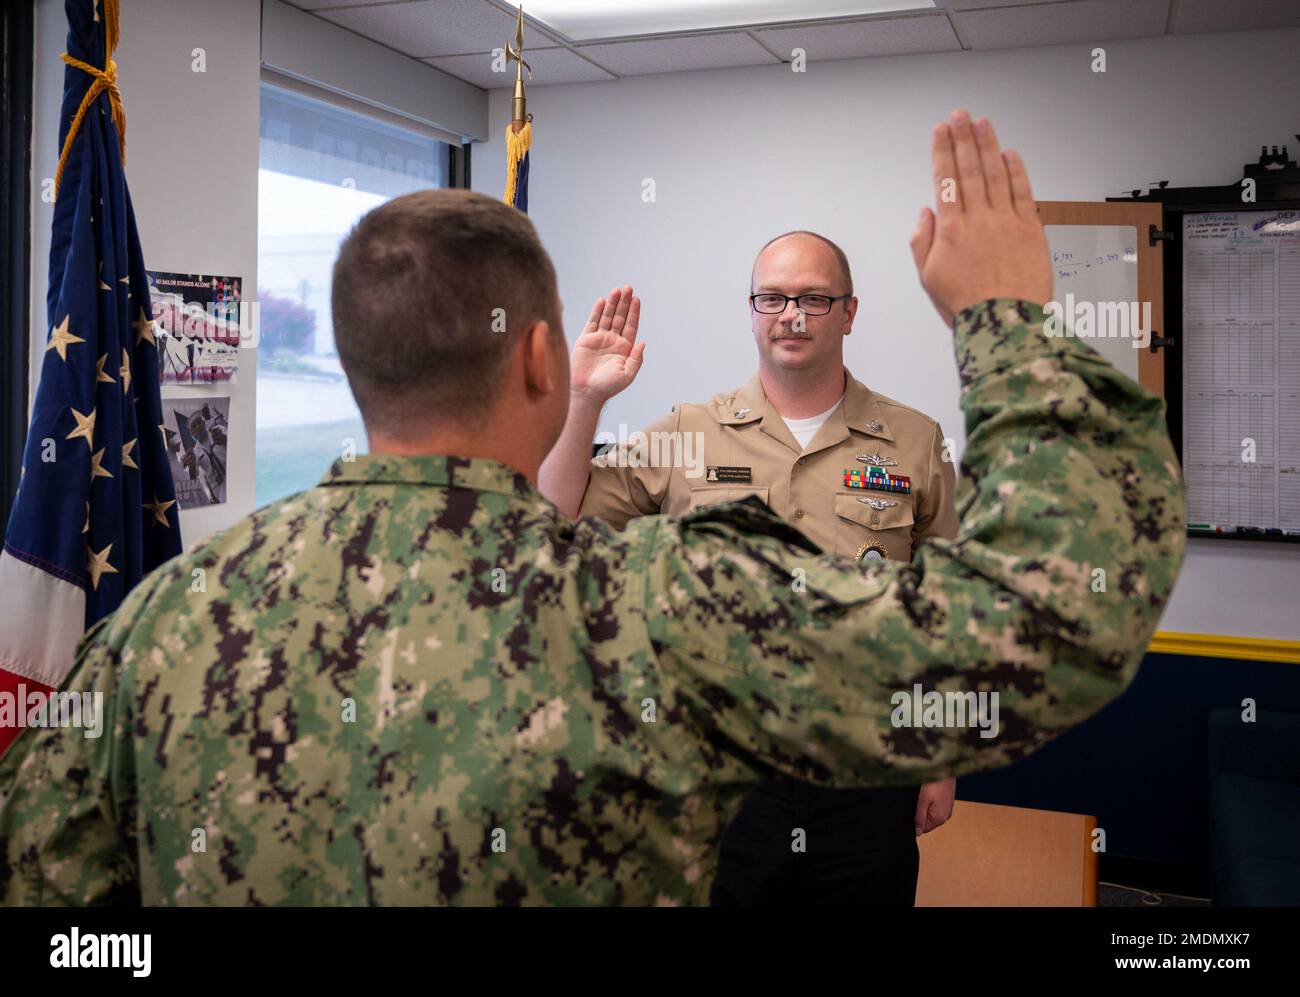 220726-N-WF272-1024 YORK, Pa. (July 26, 2022) U.S. Navy Firecontrolman (Aegis) 1st Class Christopher Odierno, a native of San Diego, assigned to Navy Talent Acquisition Group Philadelphia, reenlists for six more years in the Navy. U.S. Navy Lt. Joshua Udy, a native of Colorado Springs, Colo., enlisted programs officer, served as reenlisting officer during the ceremony held at Navy Recruiting Station York, July 26, 2022. NTAG Philadelphia encompasses regions of Pennsylvania, New Jersey, Delaware, Maryland and West Virginia, providing recruiting services from more than 30 talent acquisition site Stock Photo